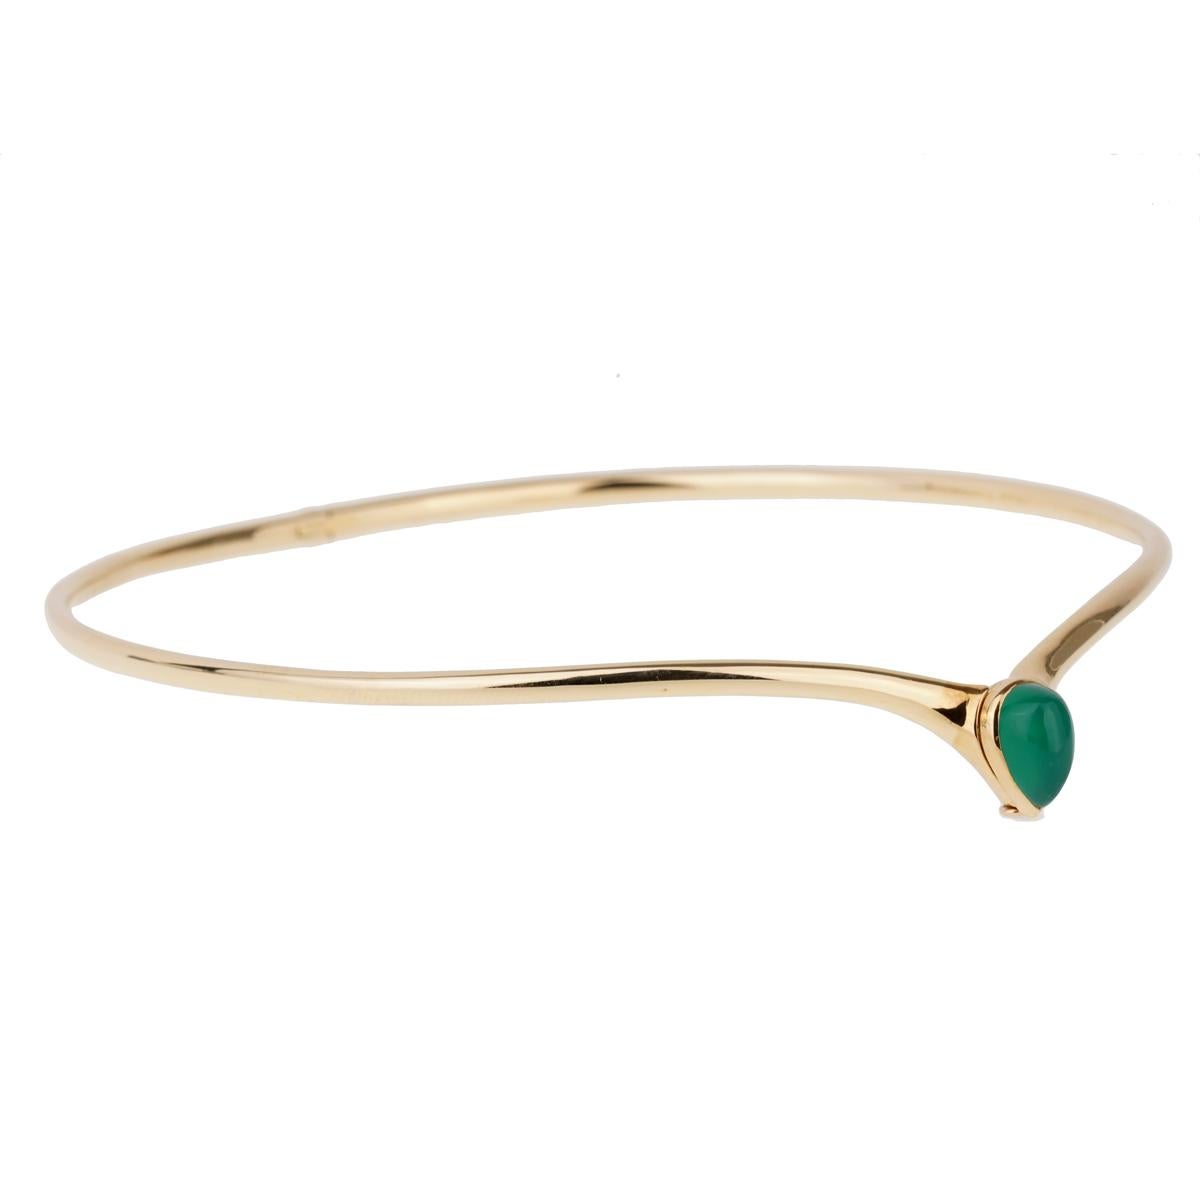 A magnificent Van Cleef & Arpels choker featuring a Chrysoprase pear shaped cabochon stone set in 18k yellow gold. Circa 1980's

The necklace measures 13.5